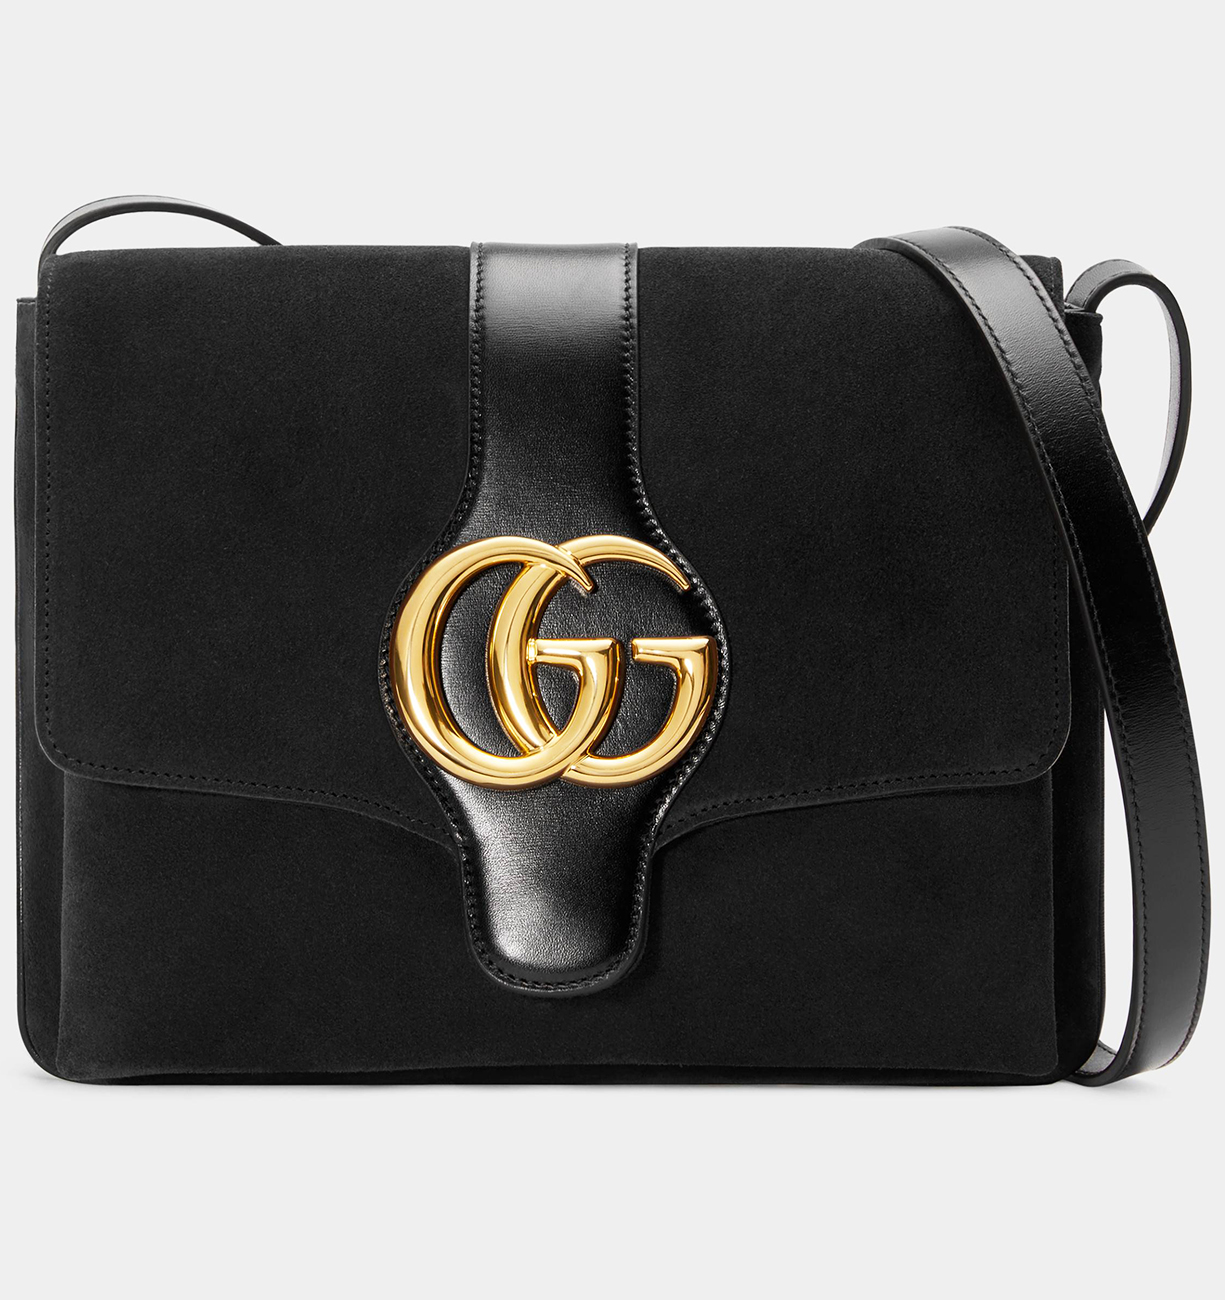 14 Best Gucci Items of 2019 | Who What Wear